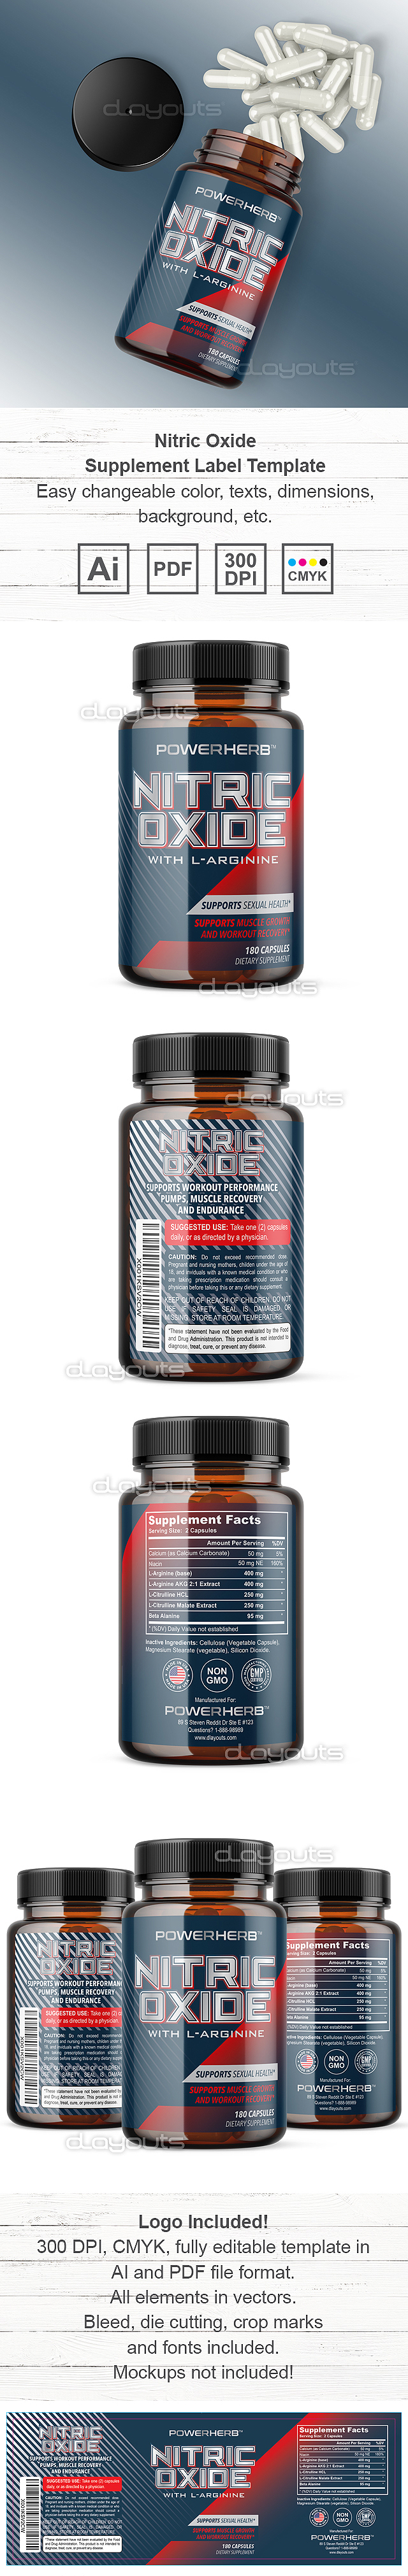 Nitric Oxide Supplement Label Template